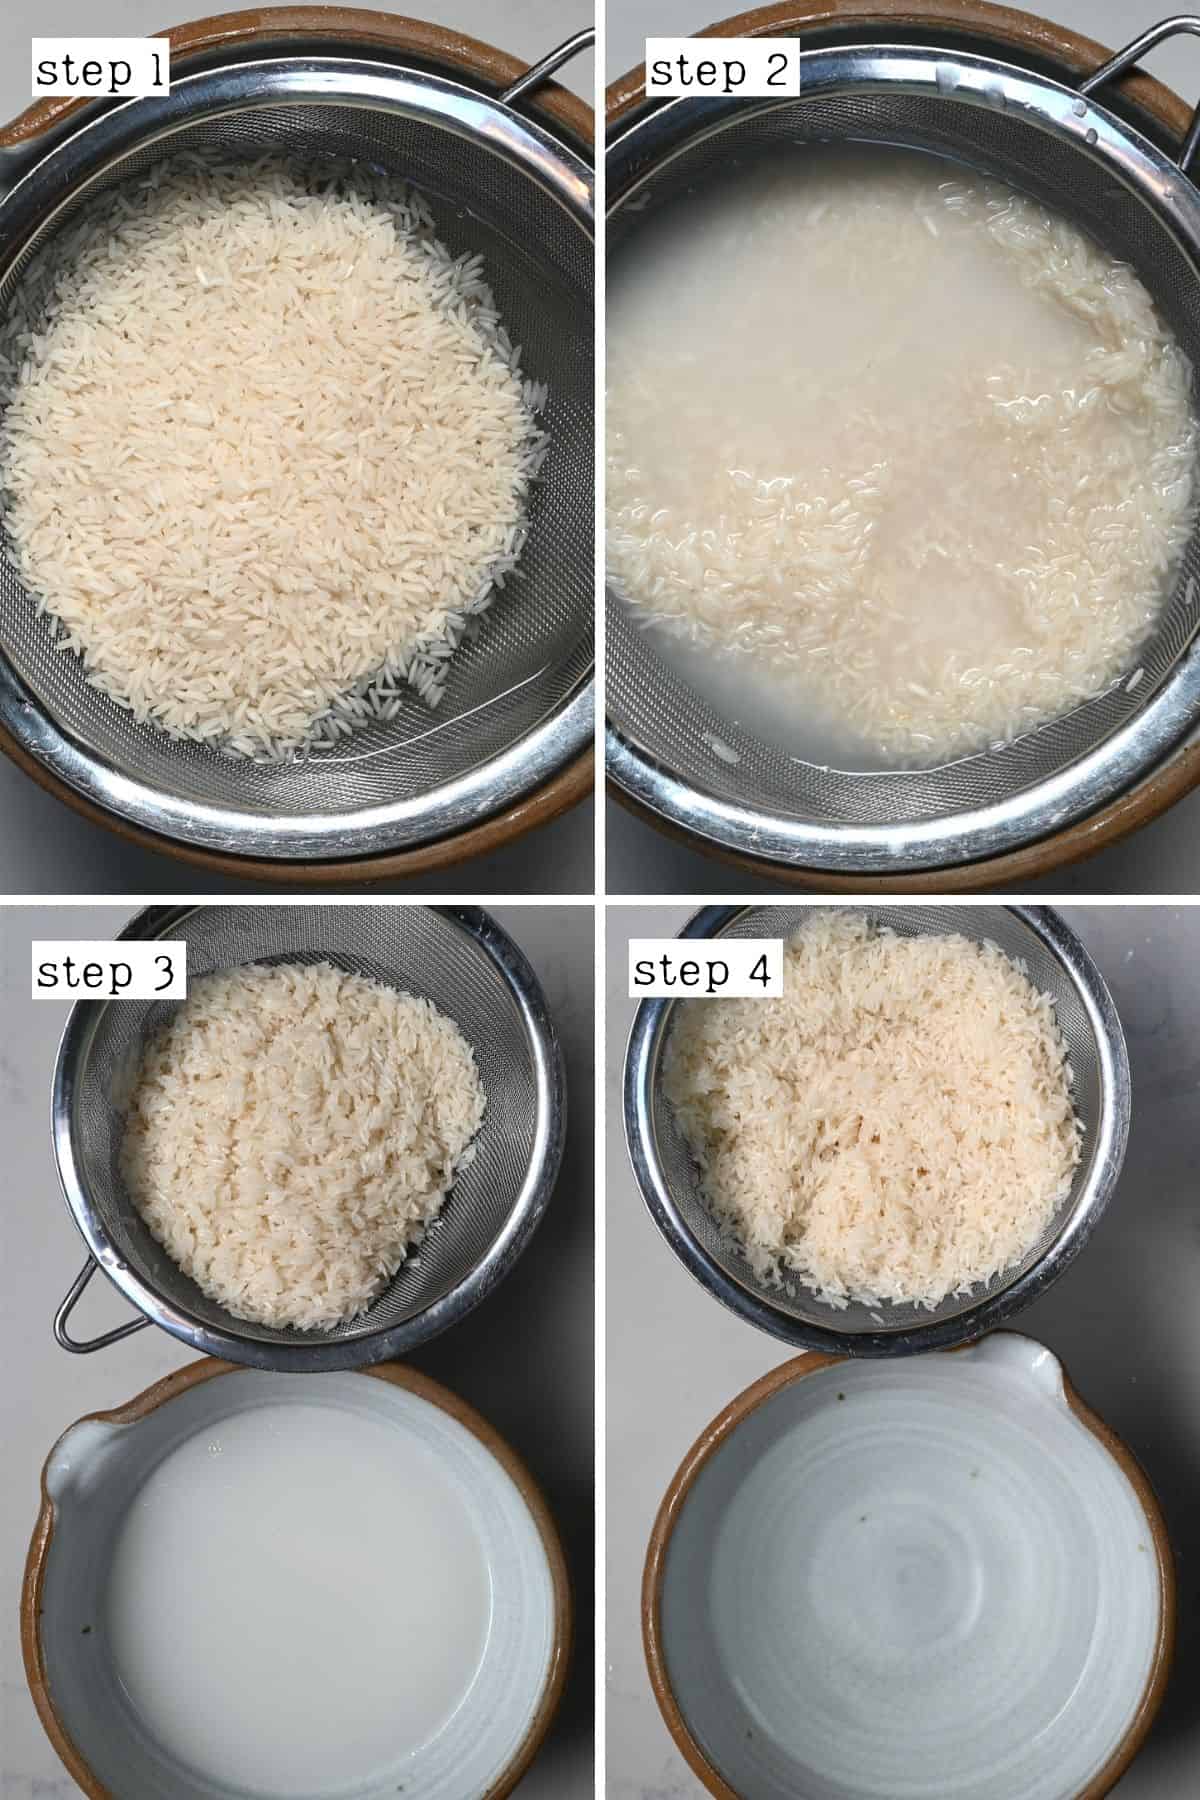 Steps for rinsing rice in cold water